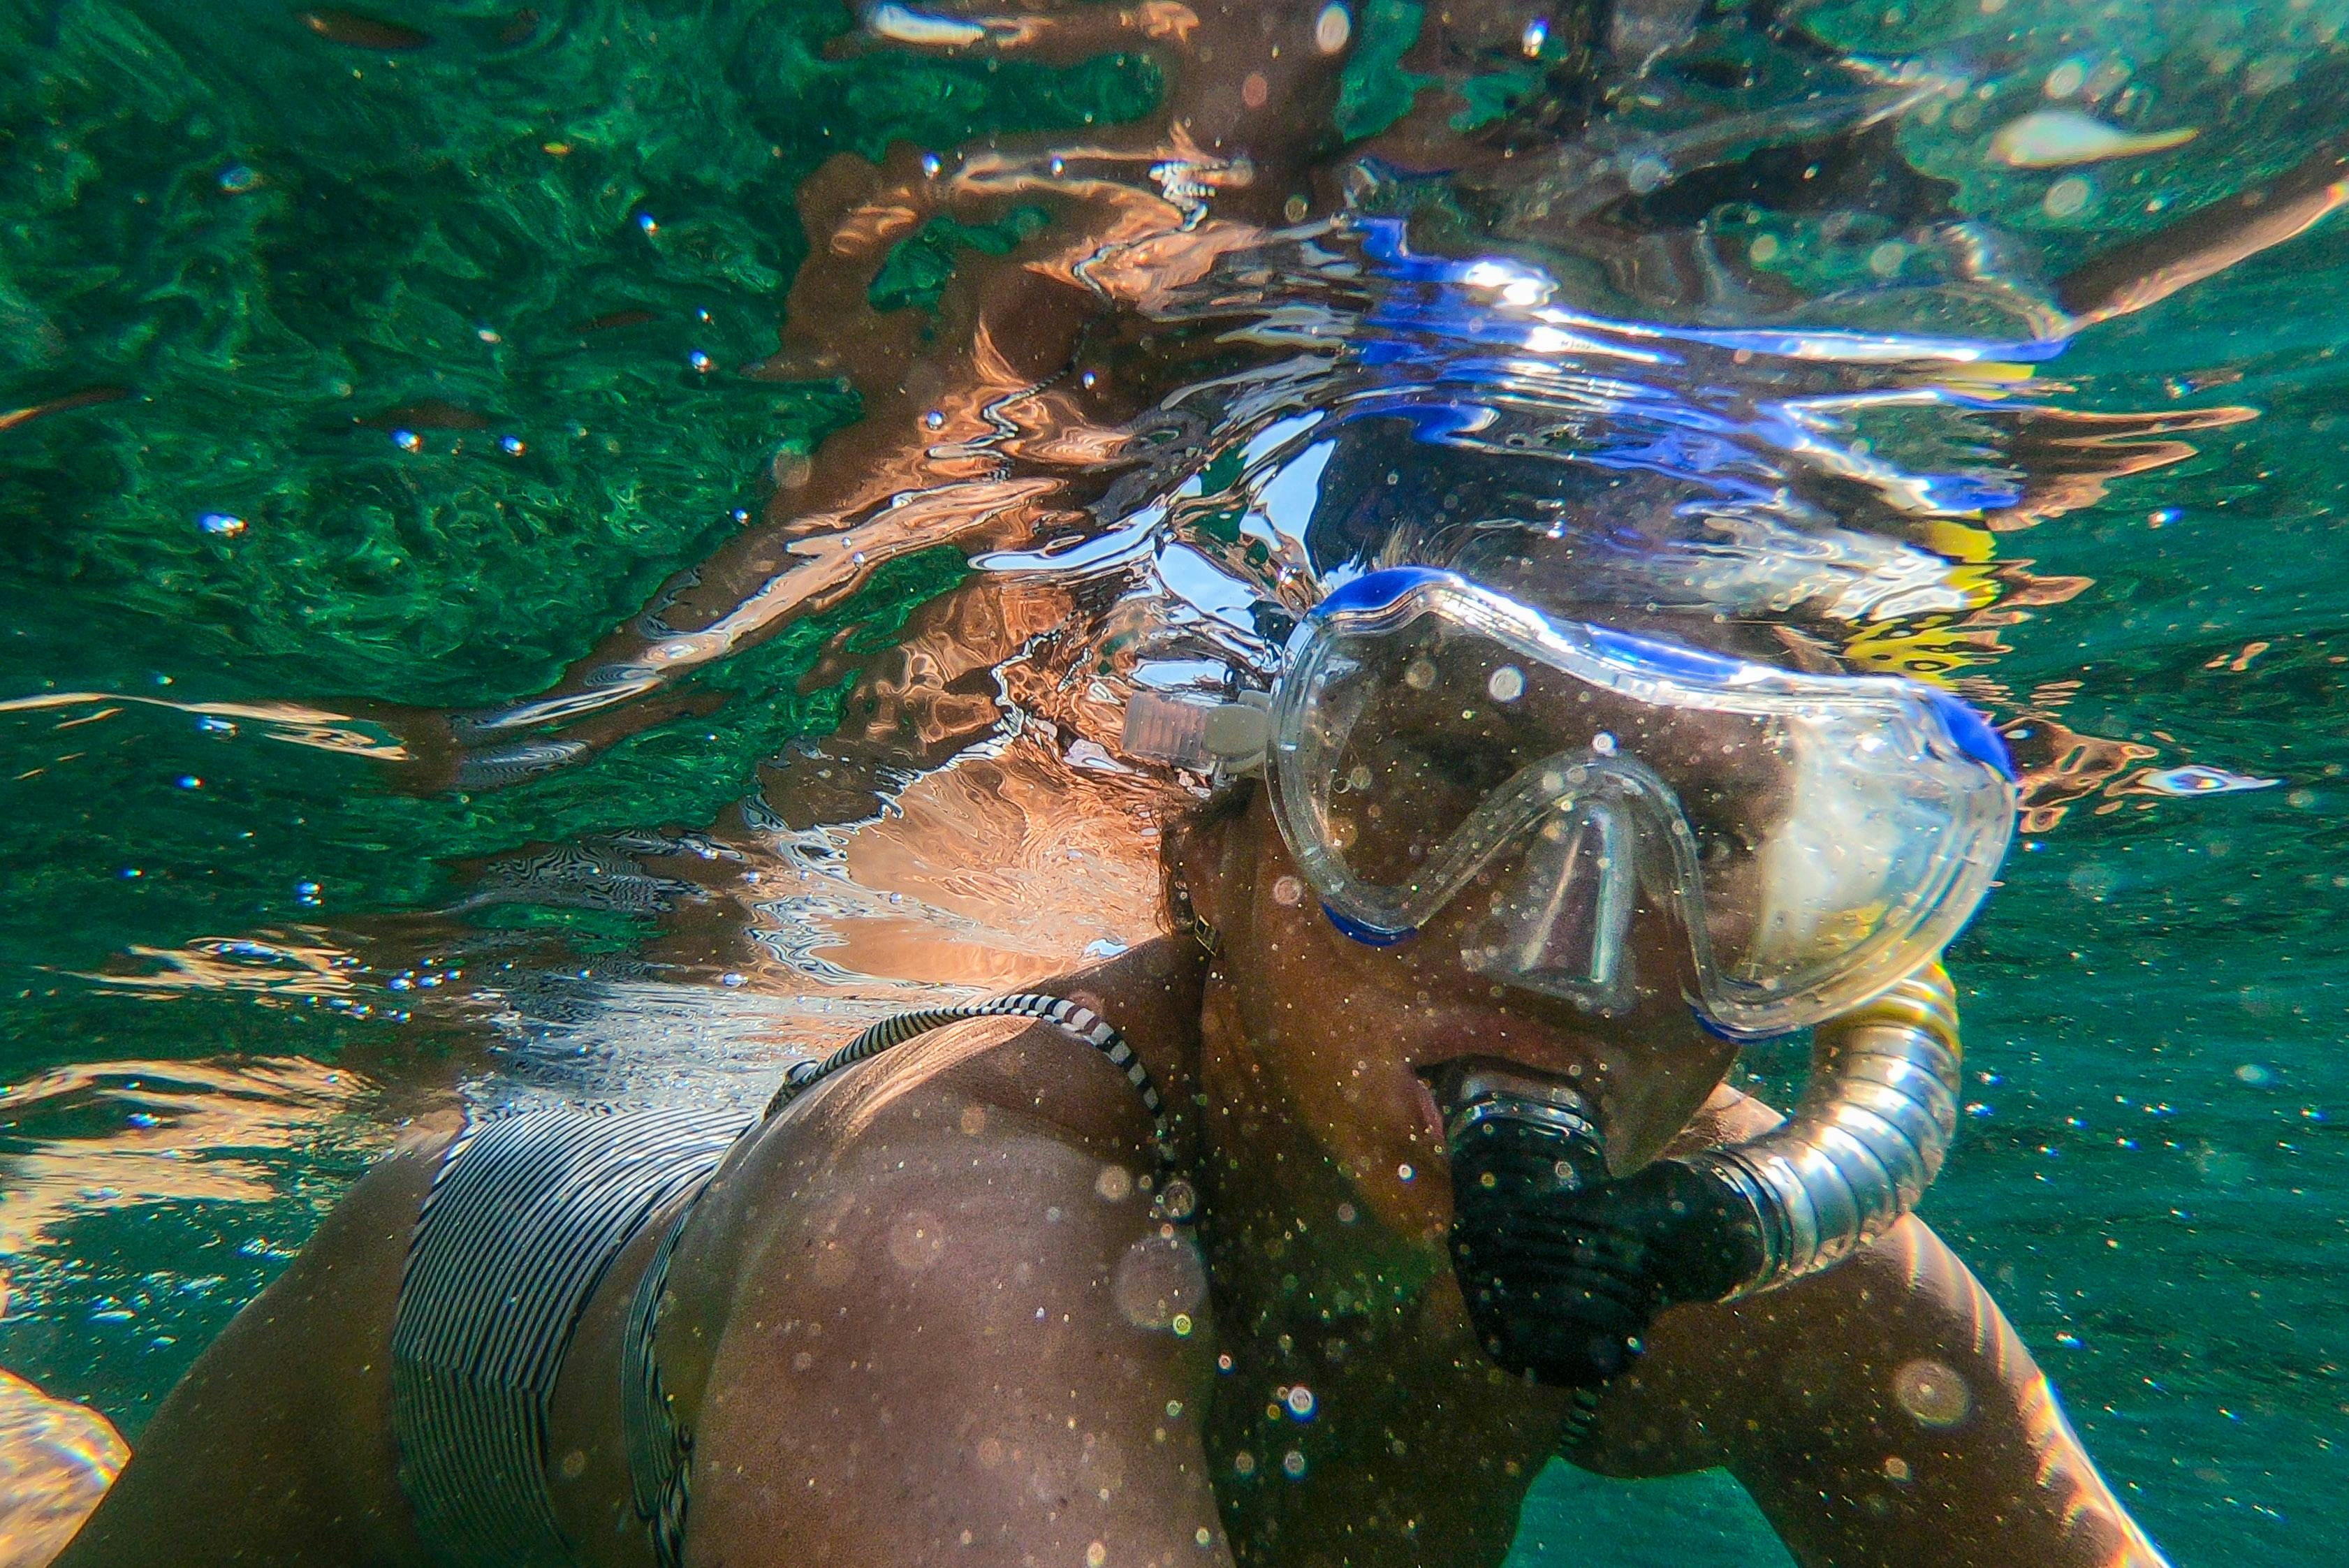 Snorkeling Gear for Travelers: What to Pack for Underwater Exploration